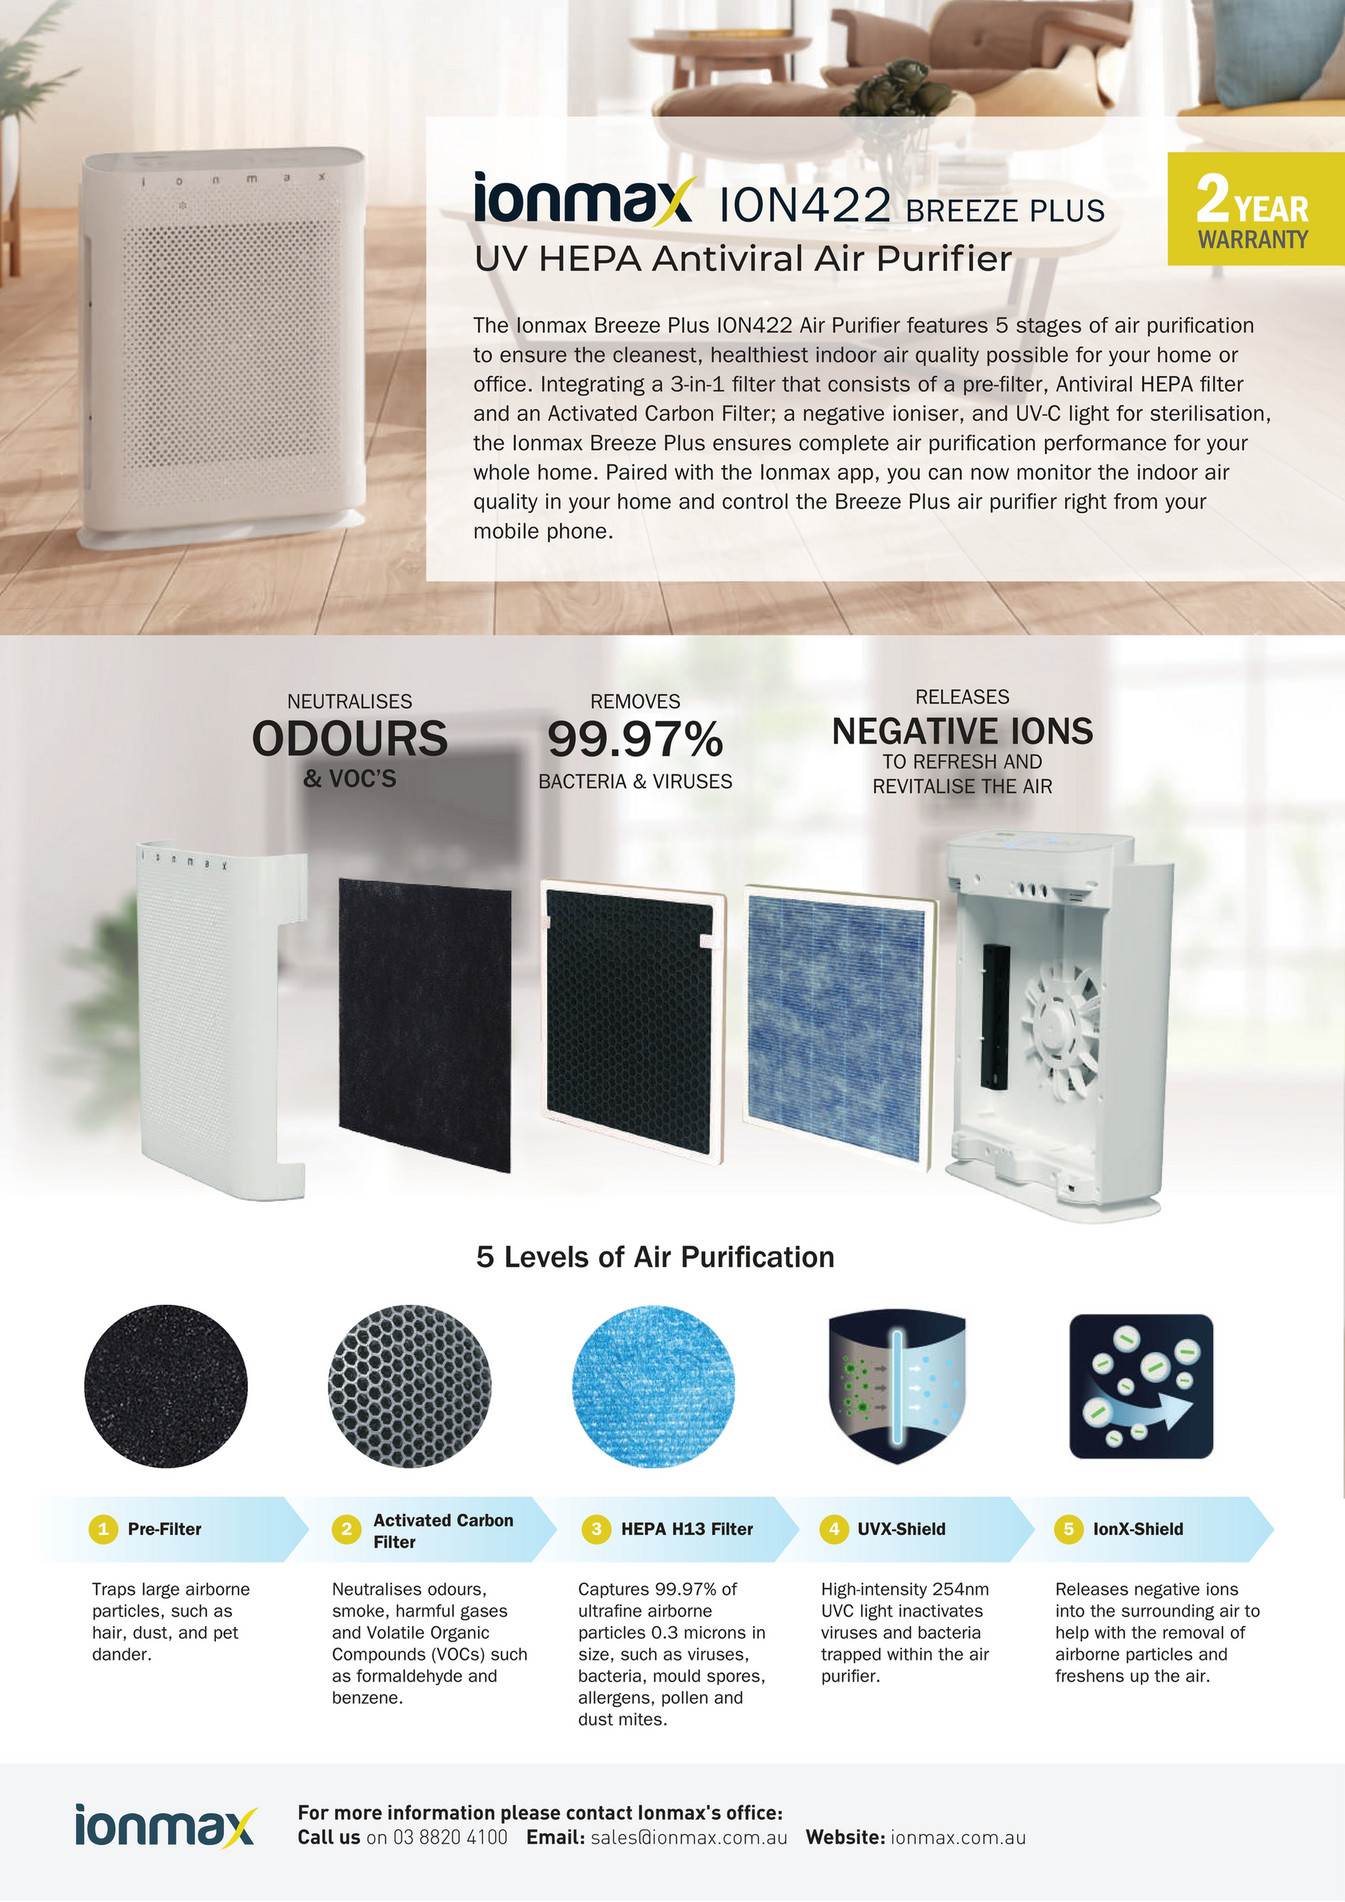 Andatech Ionmax Breeze Plus Ion422 Uv Antiviral Hepa Air Purifier Brochure Page 2 Created